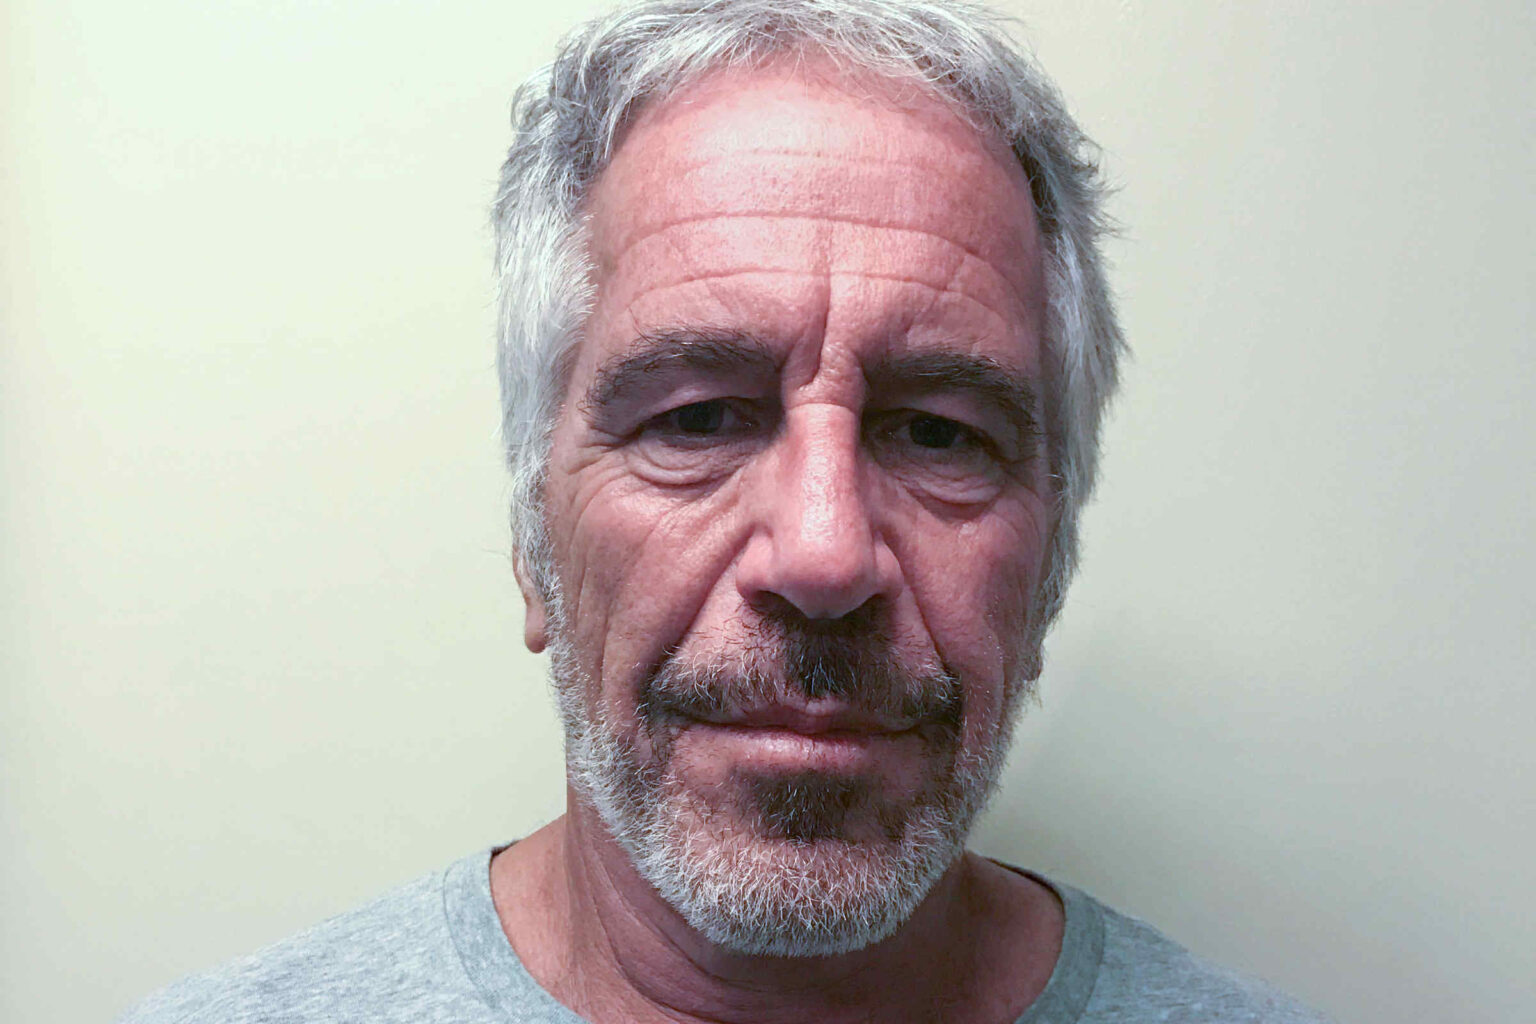 Ghislaine Maxwell isn't the only Epstein associate. Find out which one of the Jeffrey Epstein circle of family and friends might be behind bars next.